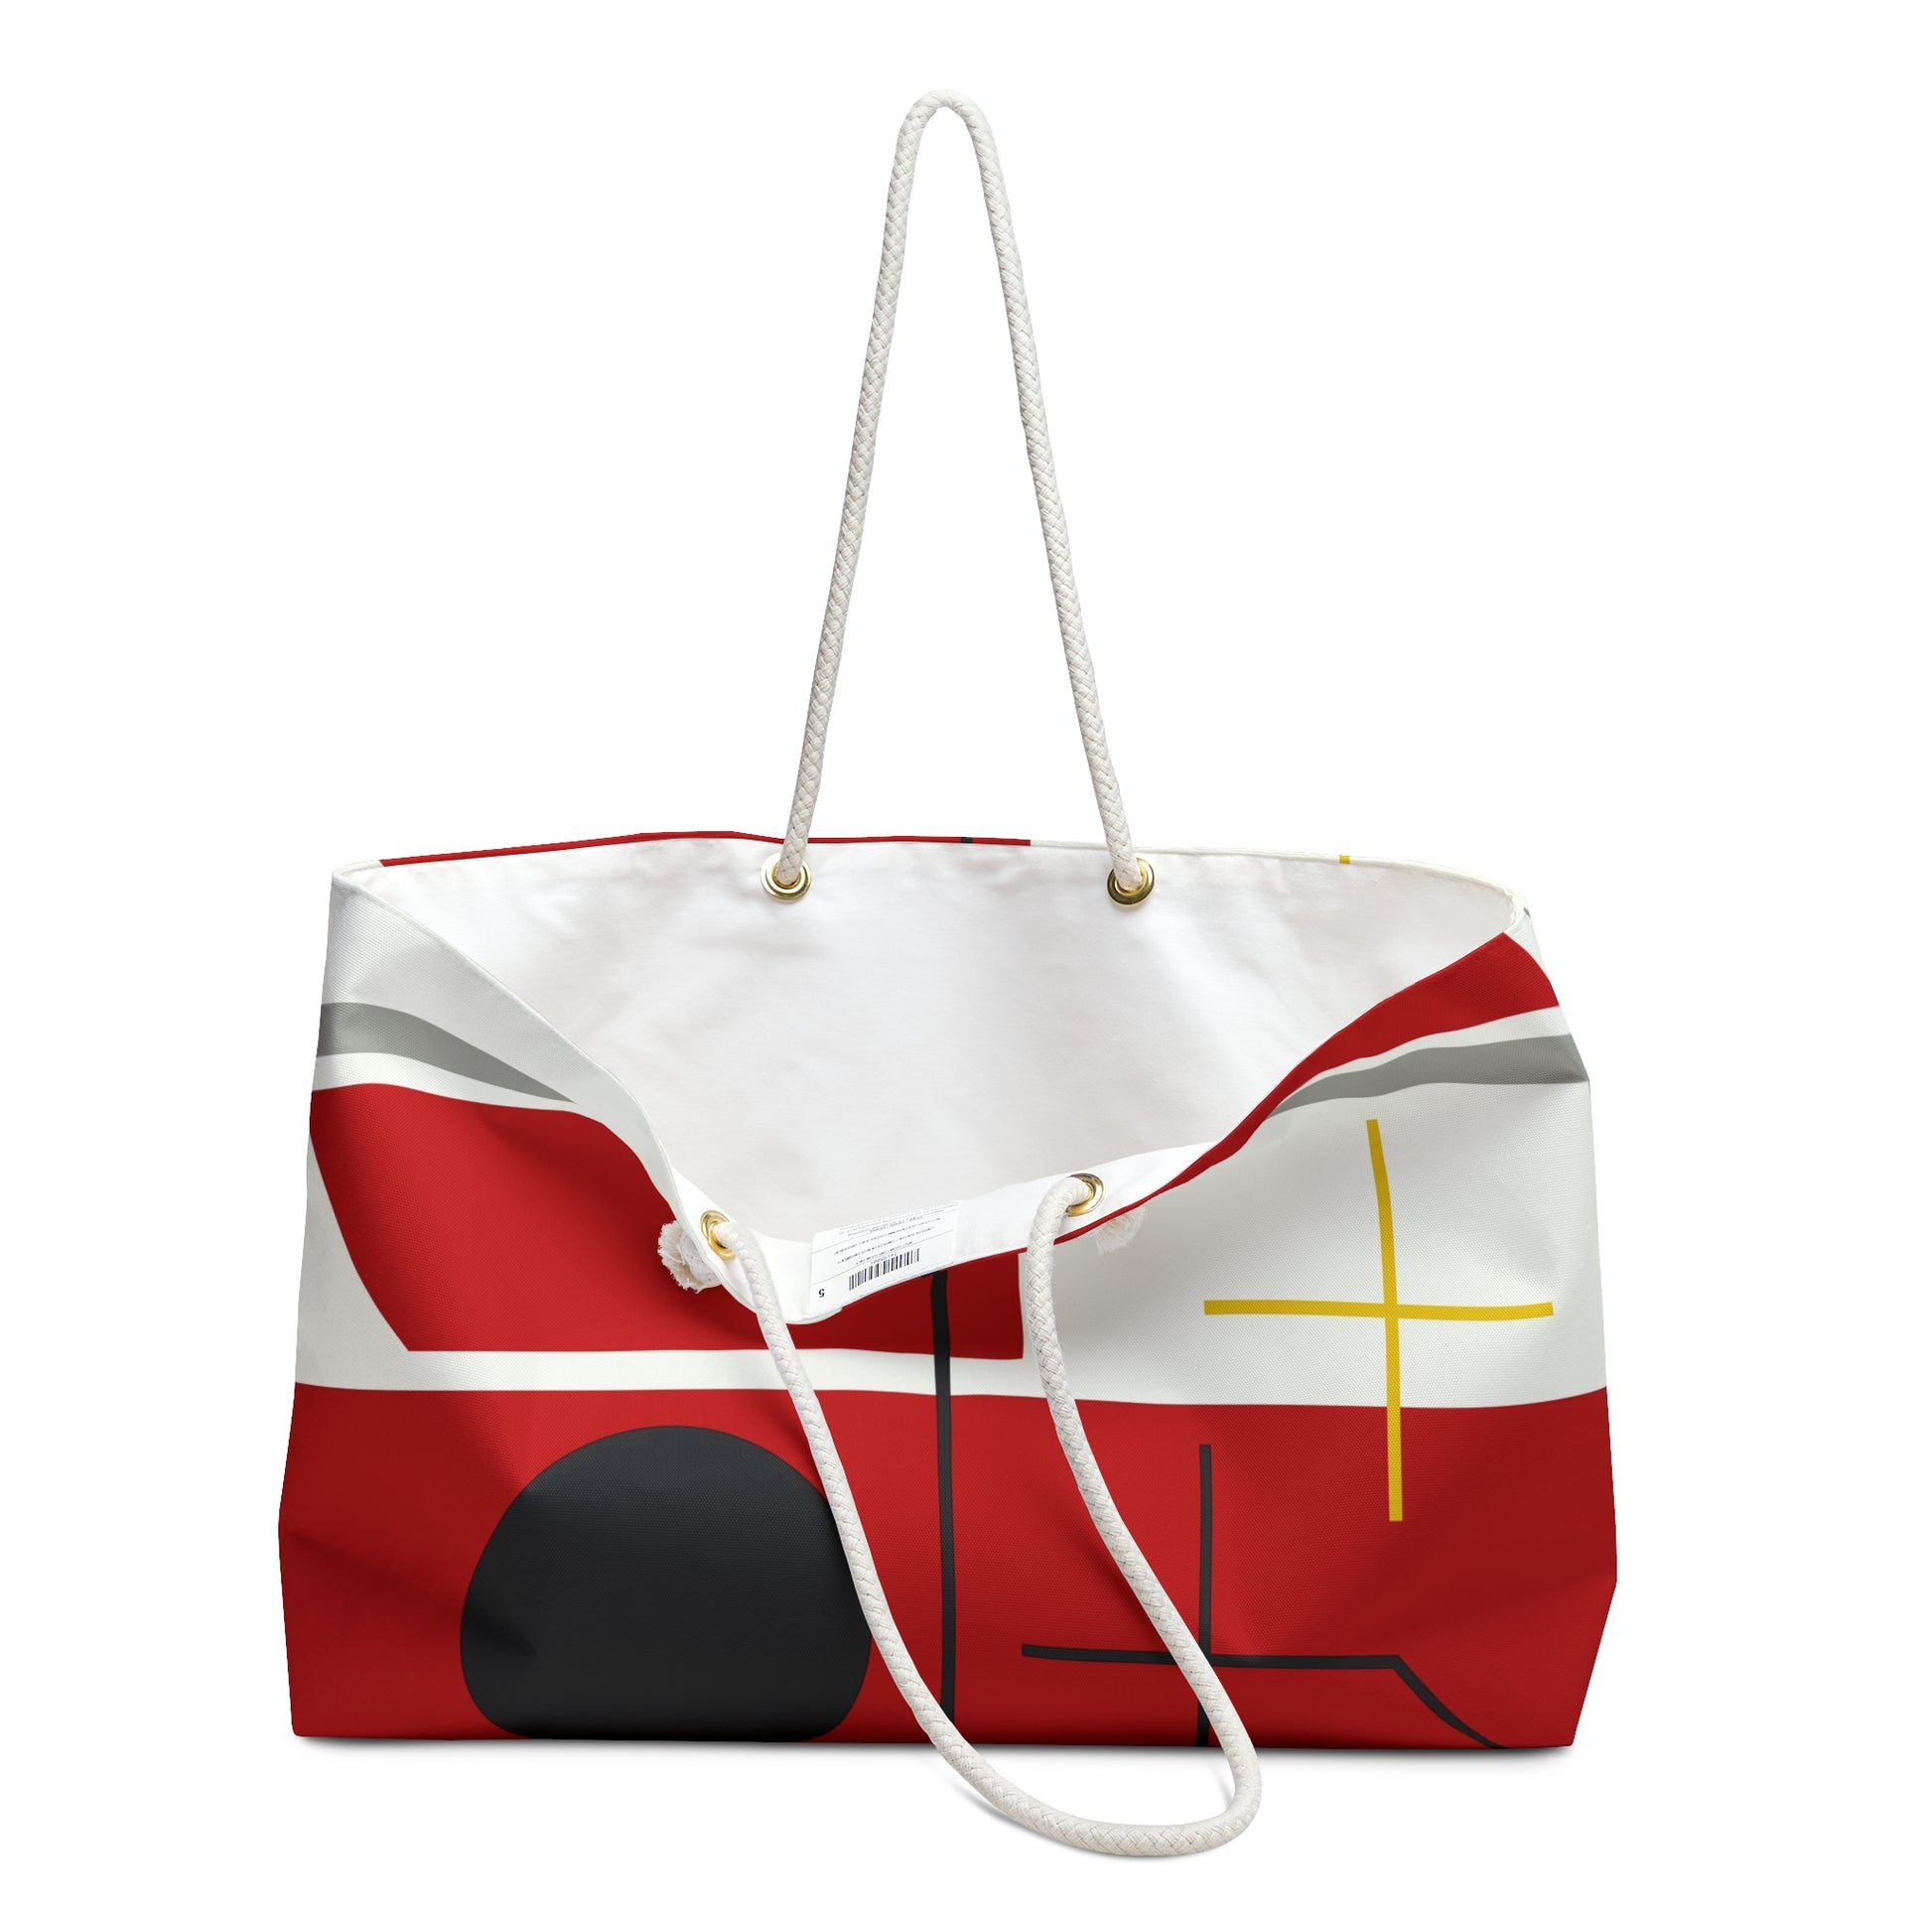 MYRIAM THYES - FOUR SPACES WITH PLANES, CIRCLES AND CROSS - WEEKENDER TOTE BAG